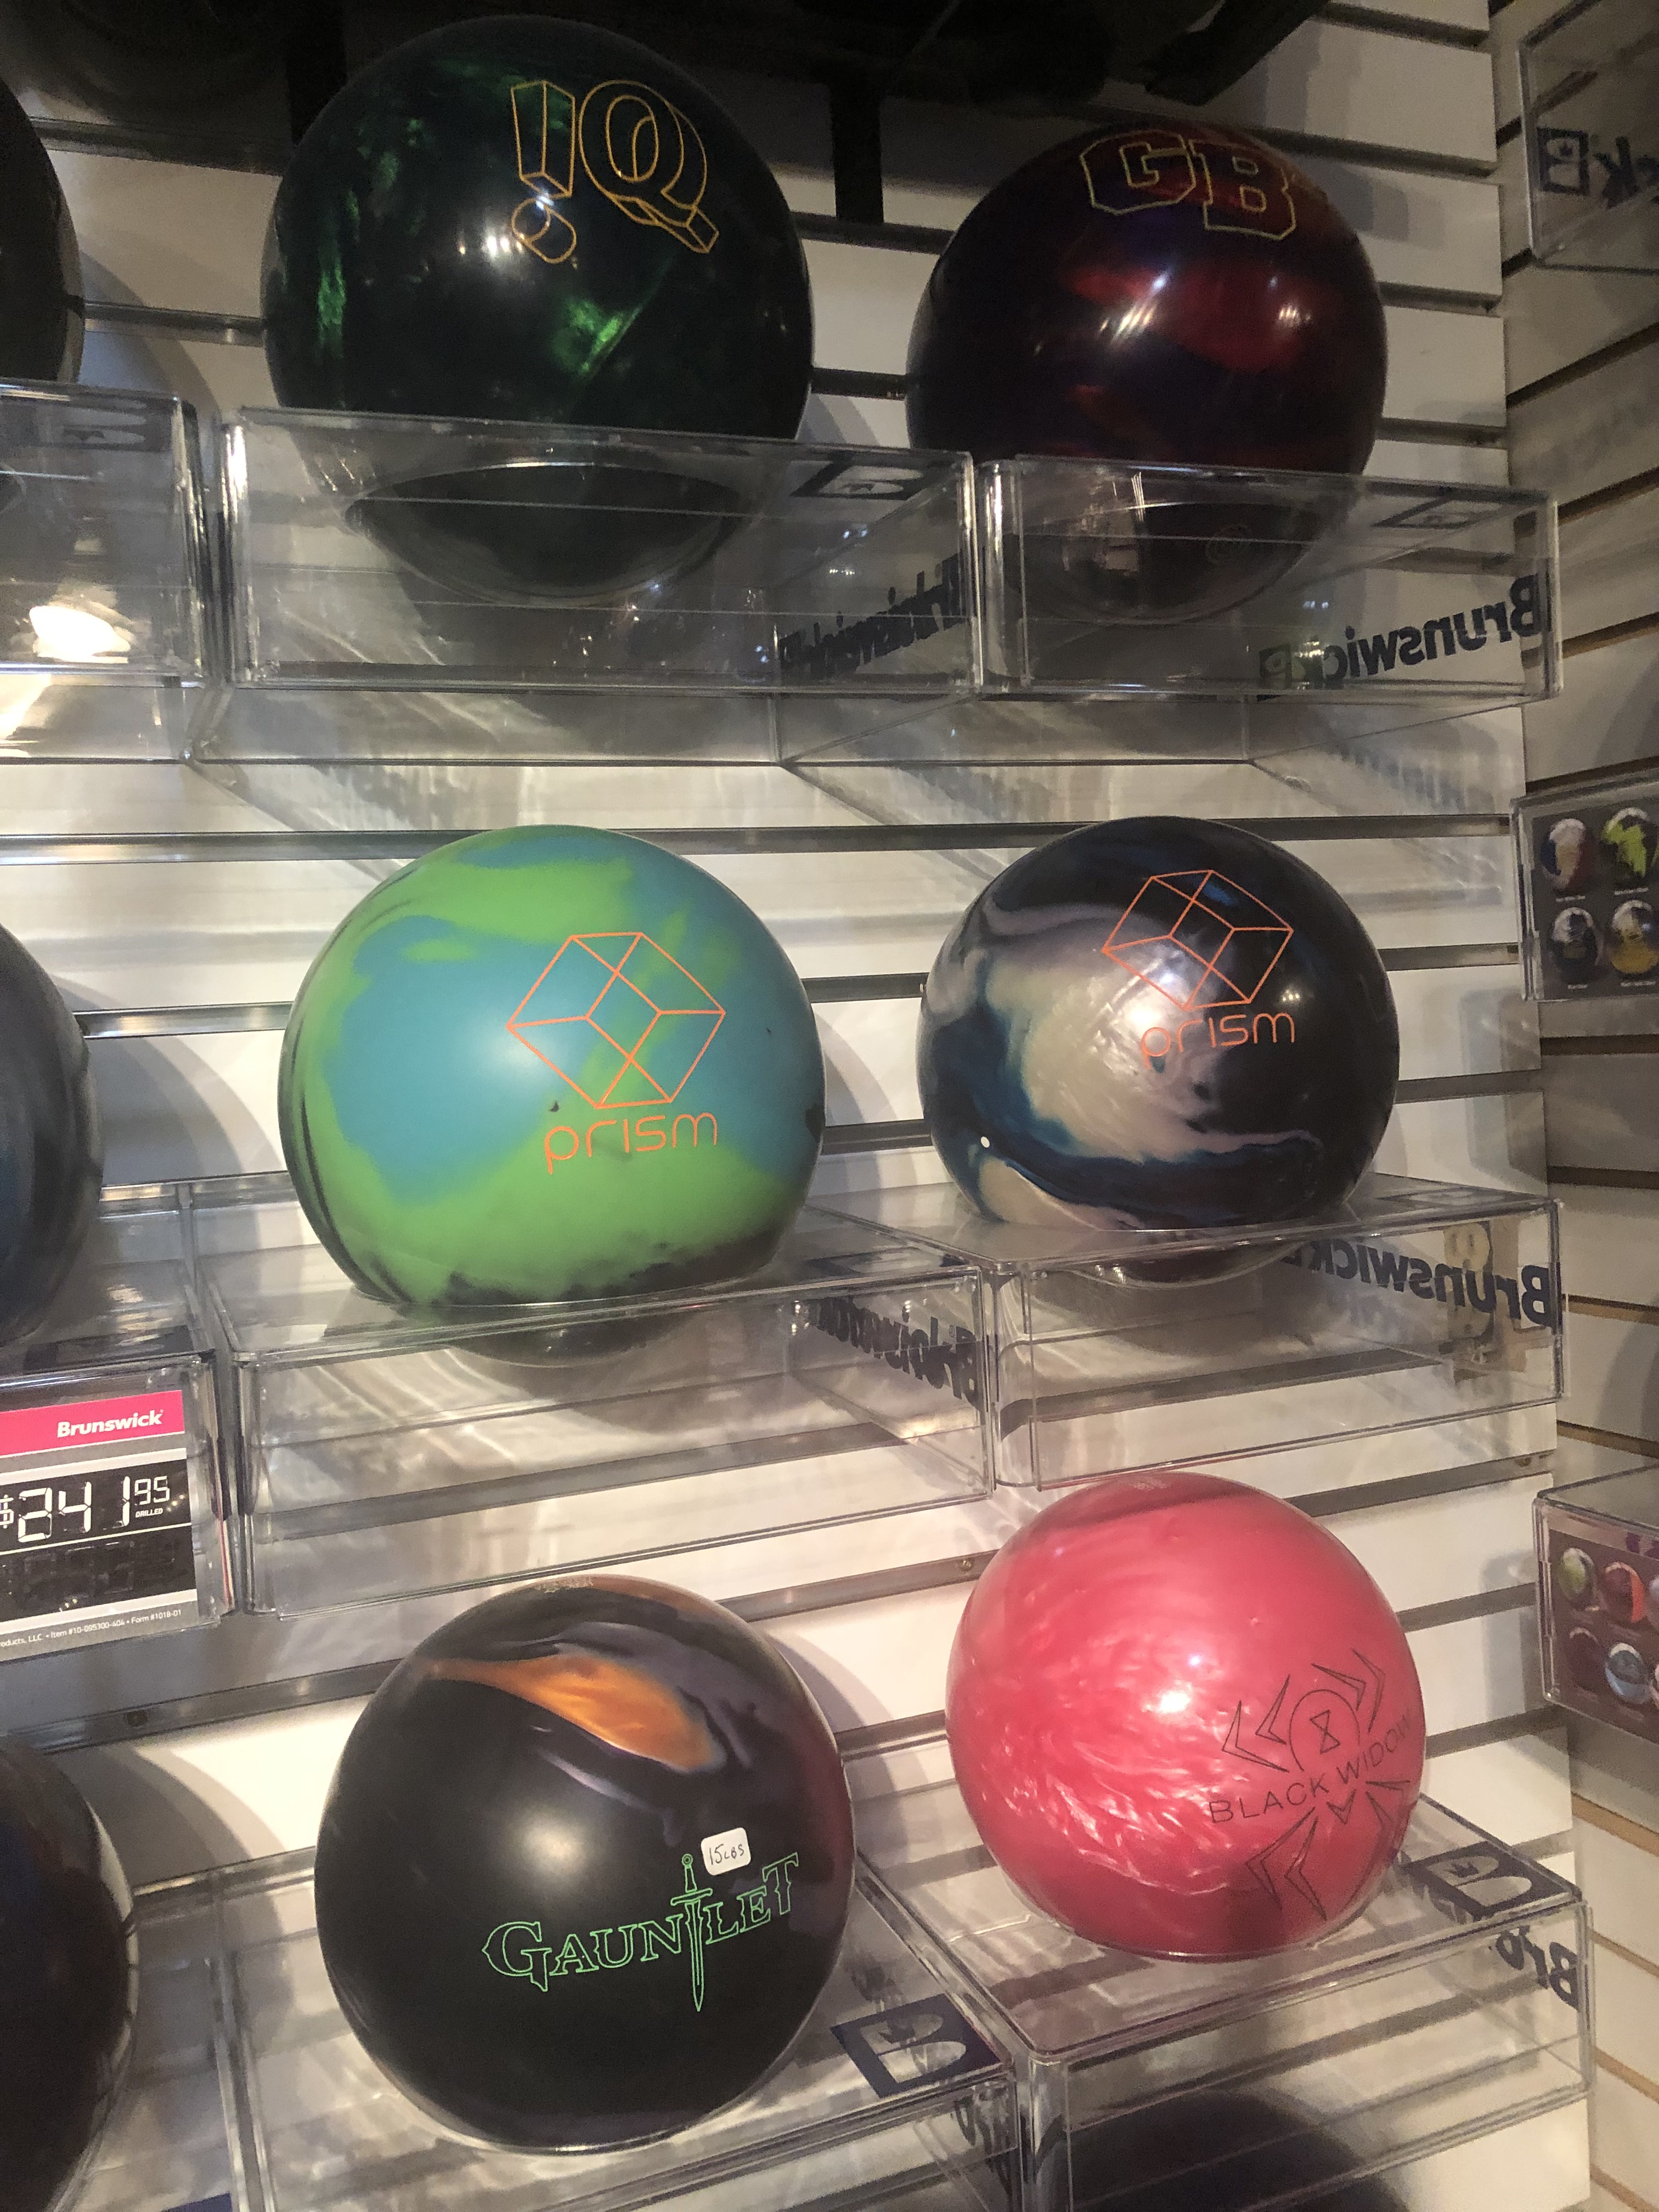 Bowling balls with prism written on them